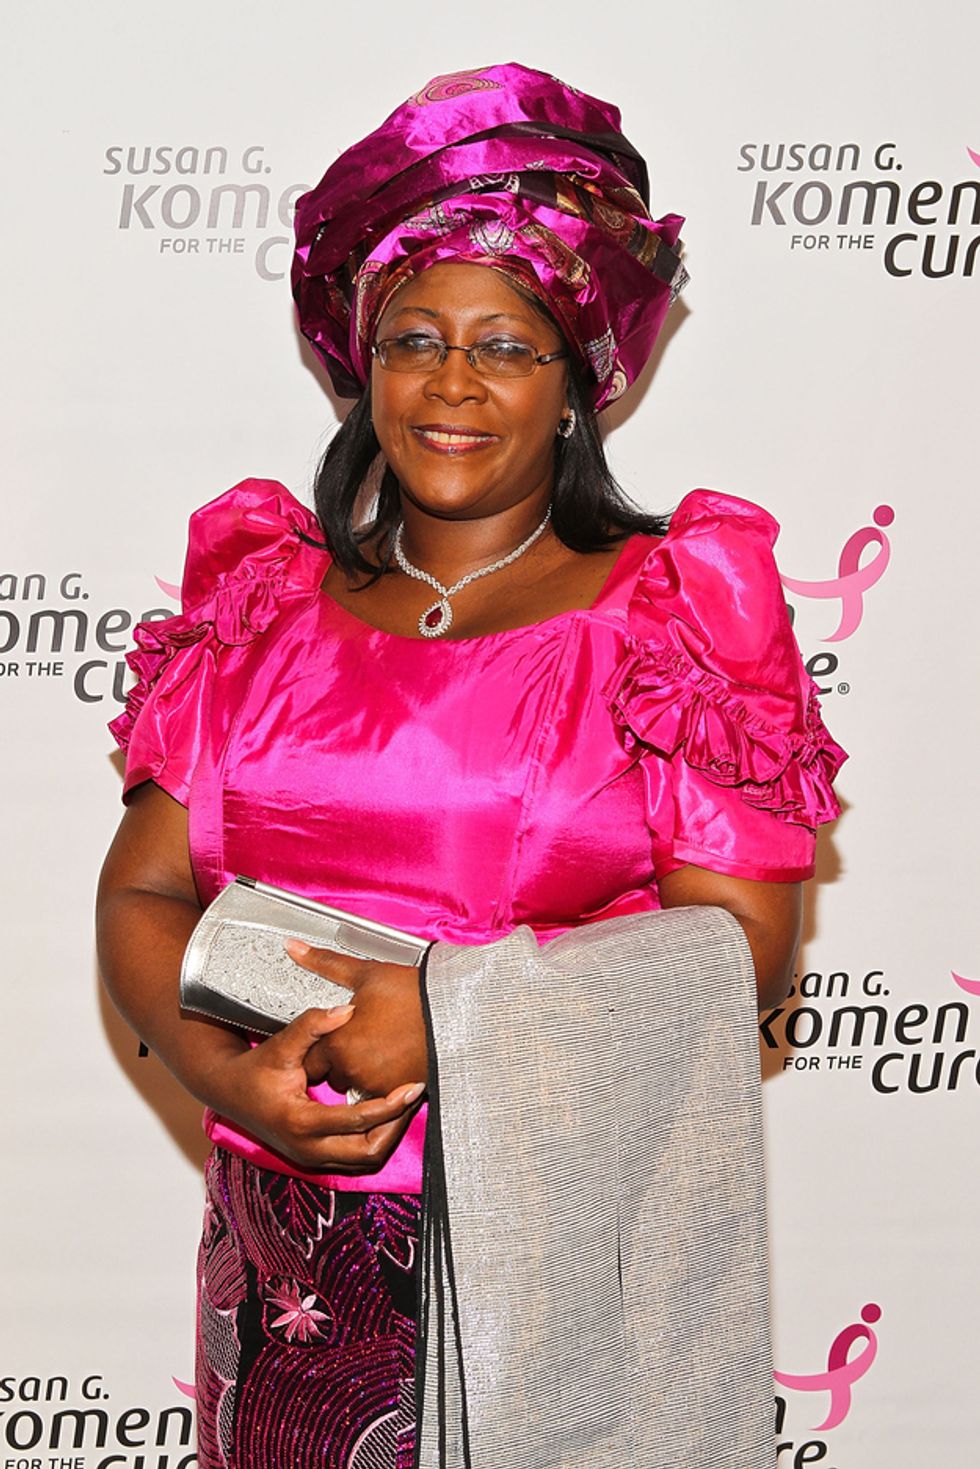 Game Changer? Zambia's First Lady Rejects State Homophobia